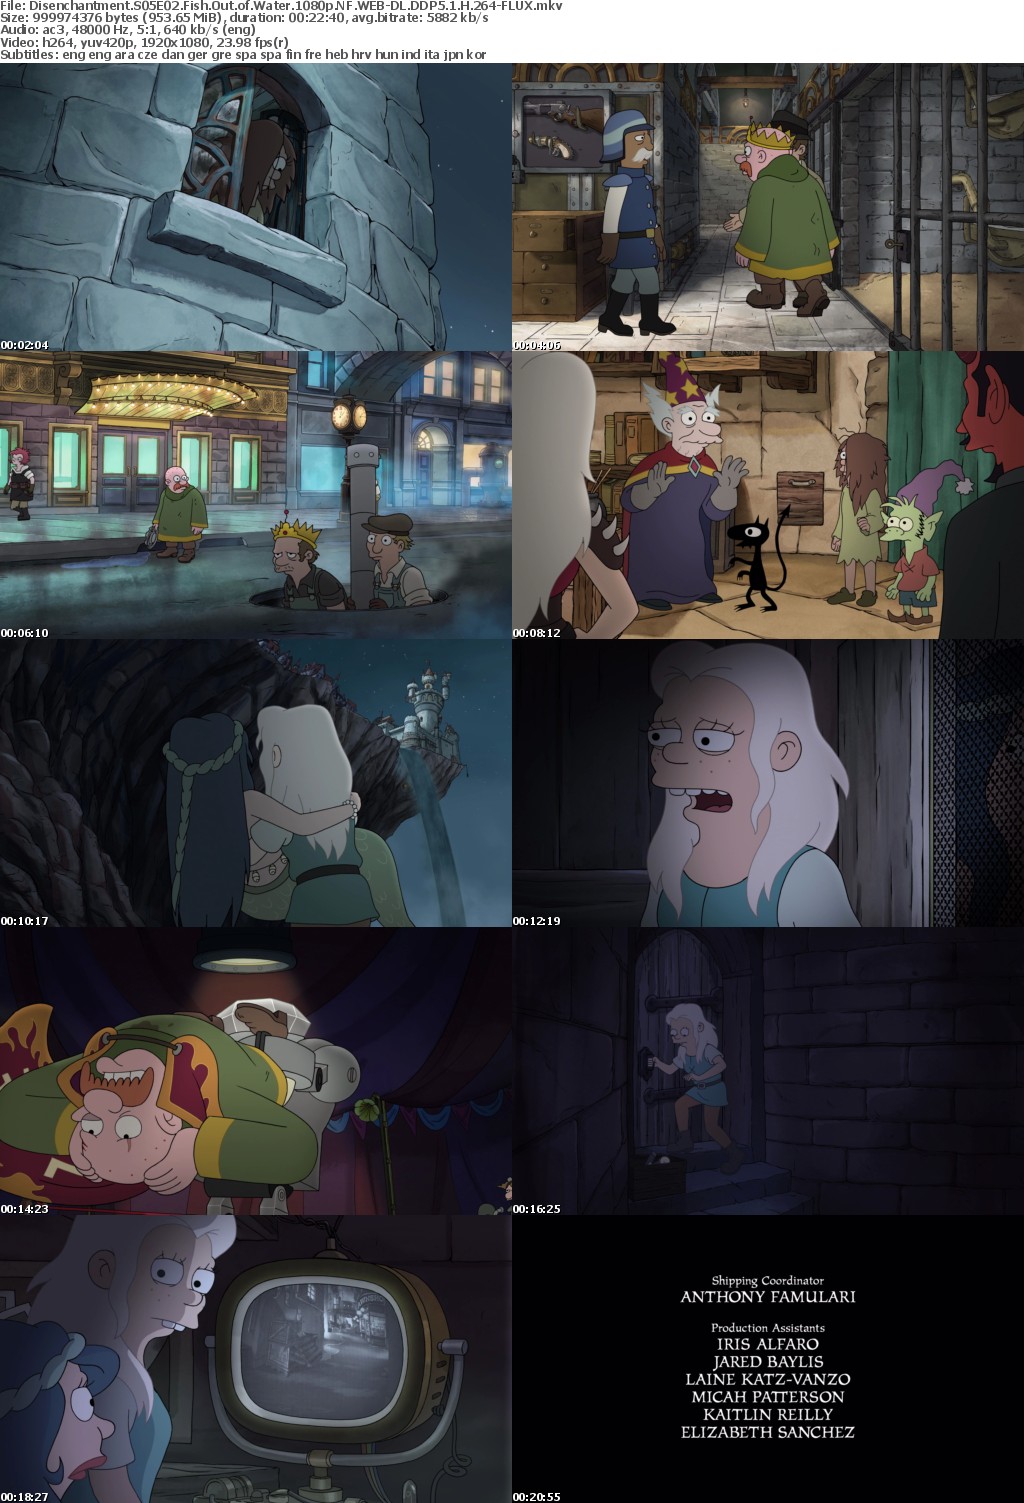 Disenchantment S05E02 Fish Out of Water 1080p NF WEB-DL DDP5 1 H 264-FLUX